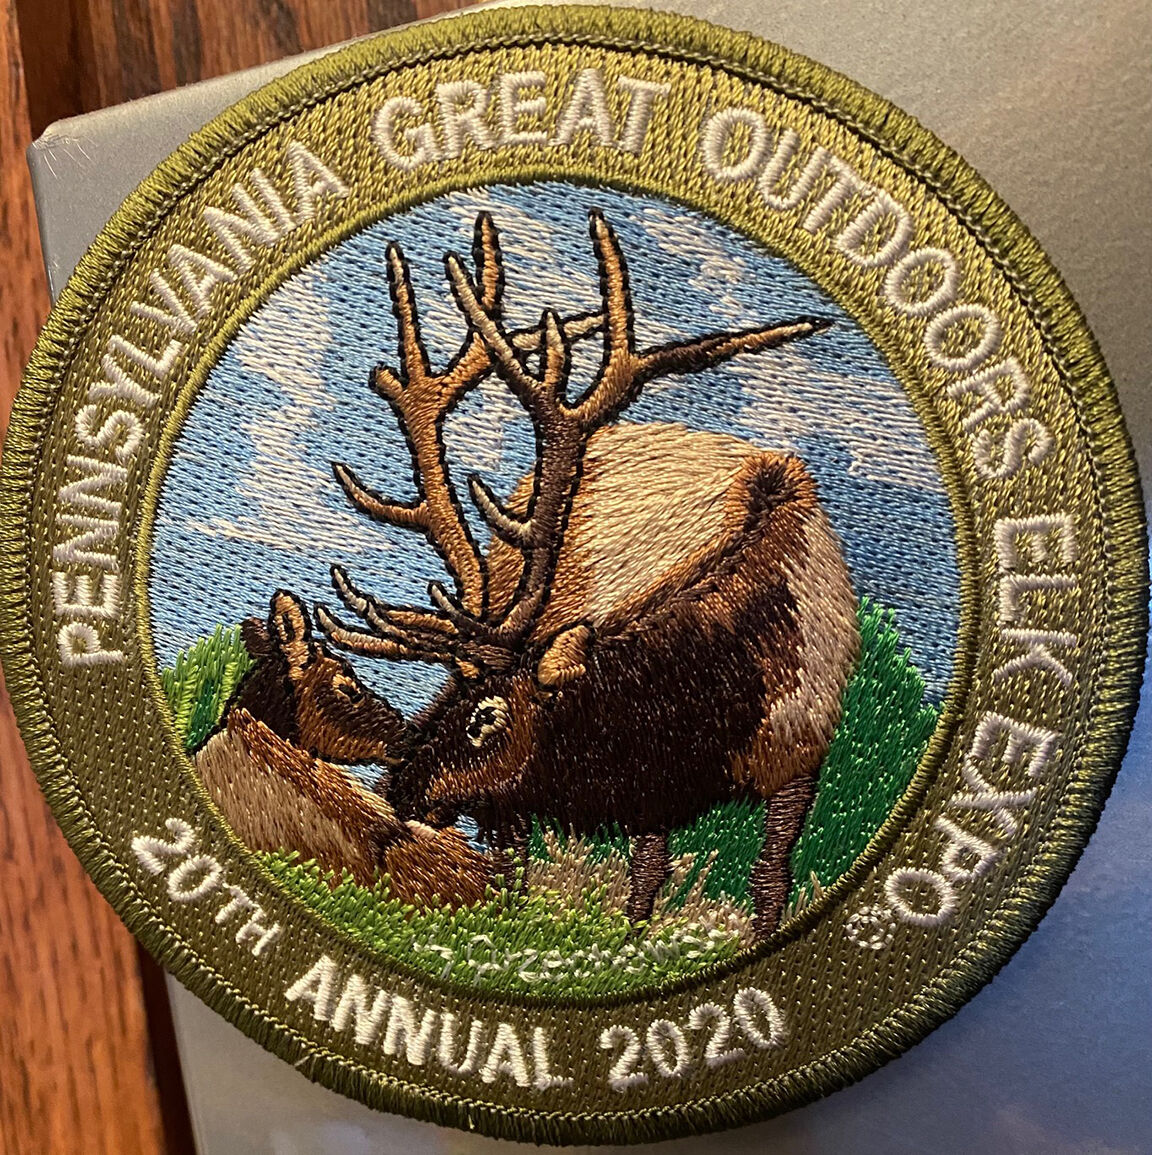 PENNSYLVANIA GREAT OUTDOOR ELK EXPO 2020  20TH ANNUAL  PATCH 